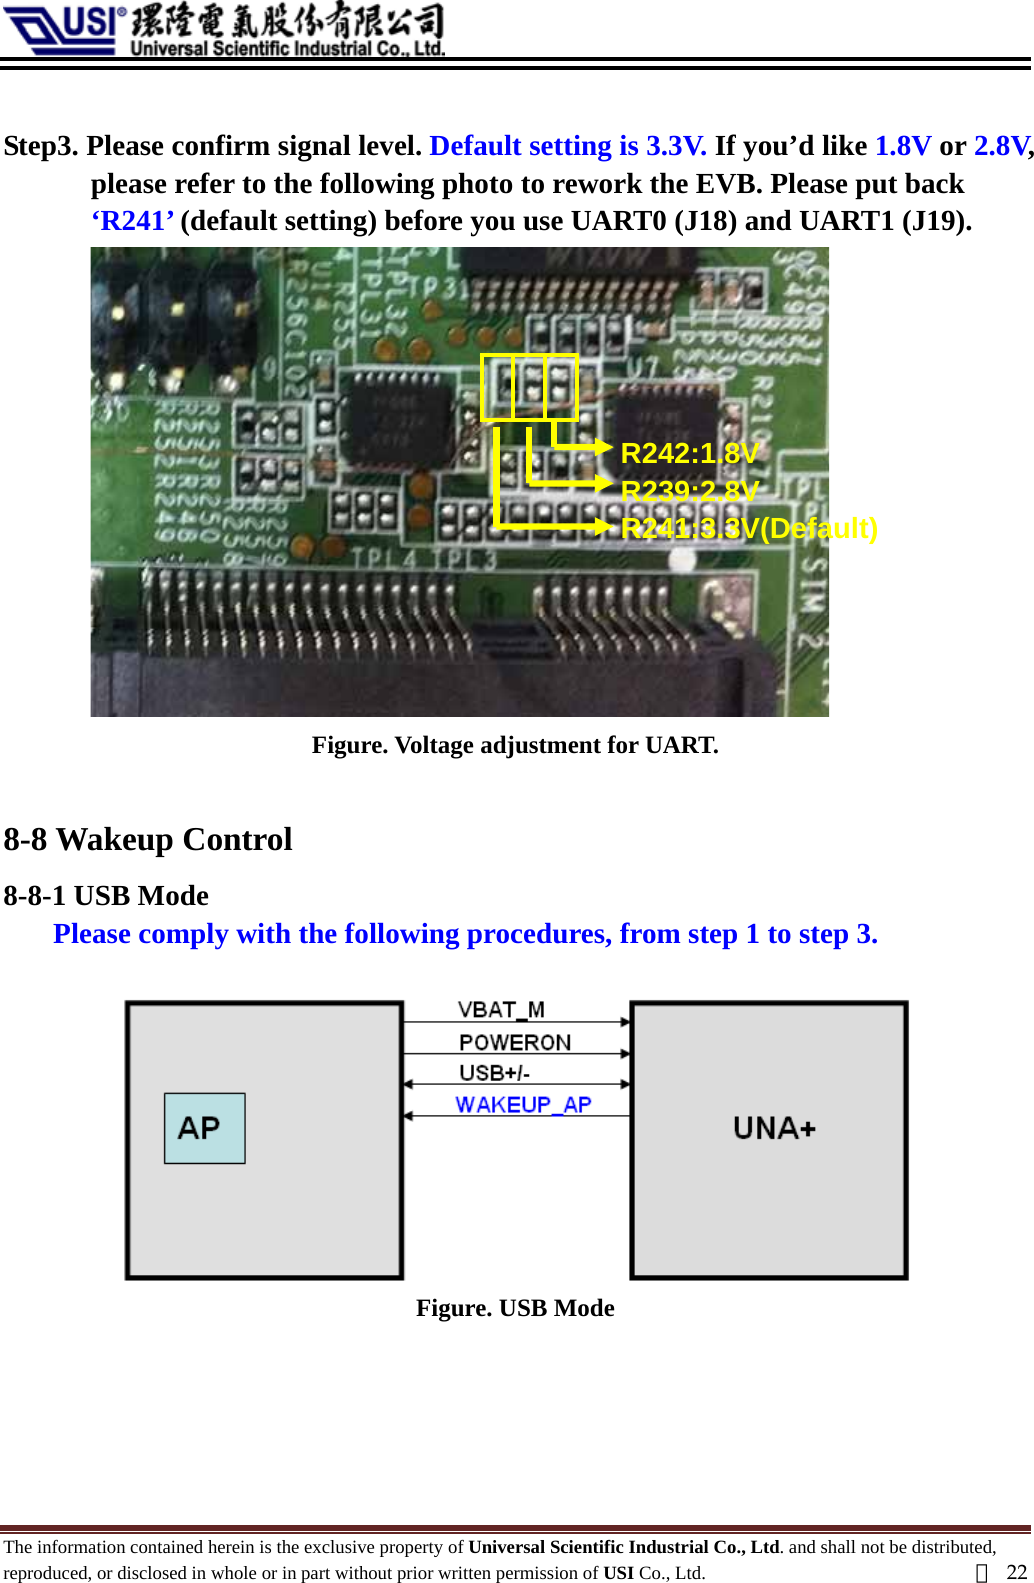   Step3. Please confirm signal level. Default setting is 3.3V. If you’d like 1.8V or 2.8V, please refer to the following photo to rework the EVB. Please put back ‘R241’ (default setting) before you use UART0 (J18) and UART1 (J19). R242:1.8V R239:2.8V R241:3.3V(Default)   Figure. Voltage adjustment for UART.  8-8 Wakeup Control 8-8-1 USB Mode Please comply with the following procedures, from step 1 to step 3.   Figure. USB Mode     The information contained herein is the exclusive property of Universal Scientific Industrial Co., Ltd. and shall not be distributed, reproduced, or disclosed in whole or in part without prior written permission of USI Co., Ltd.  頁22 